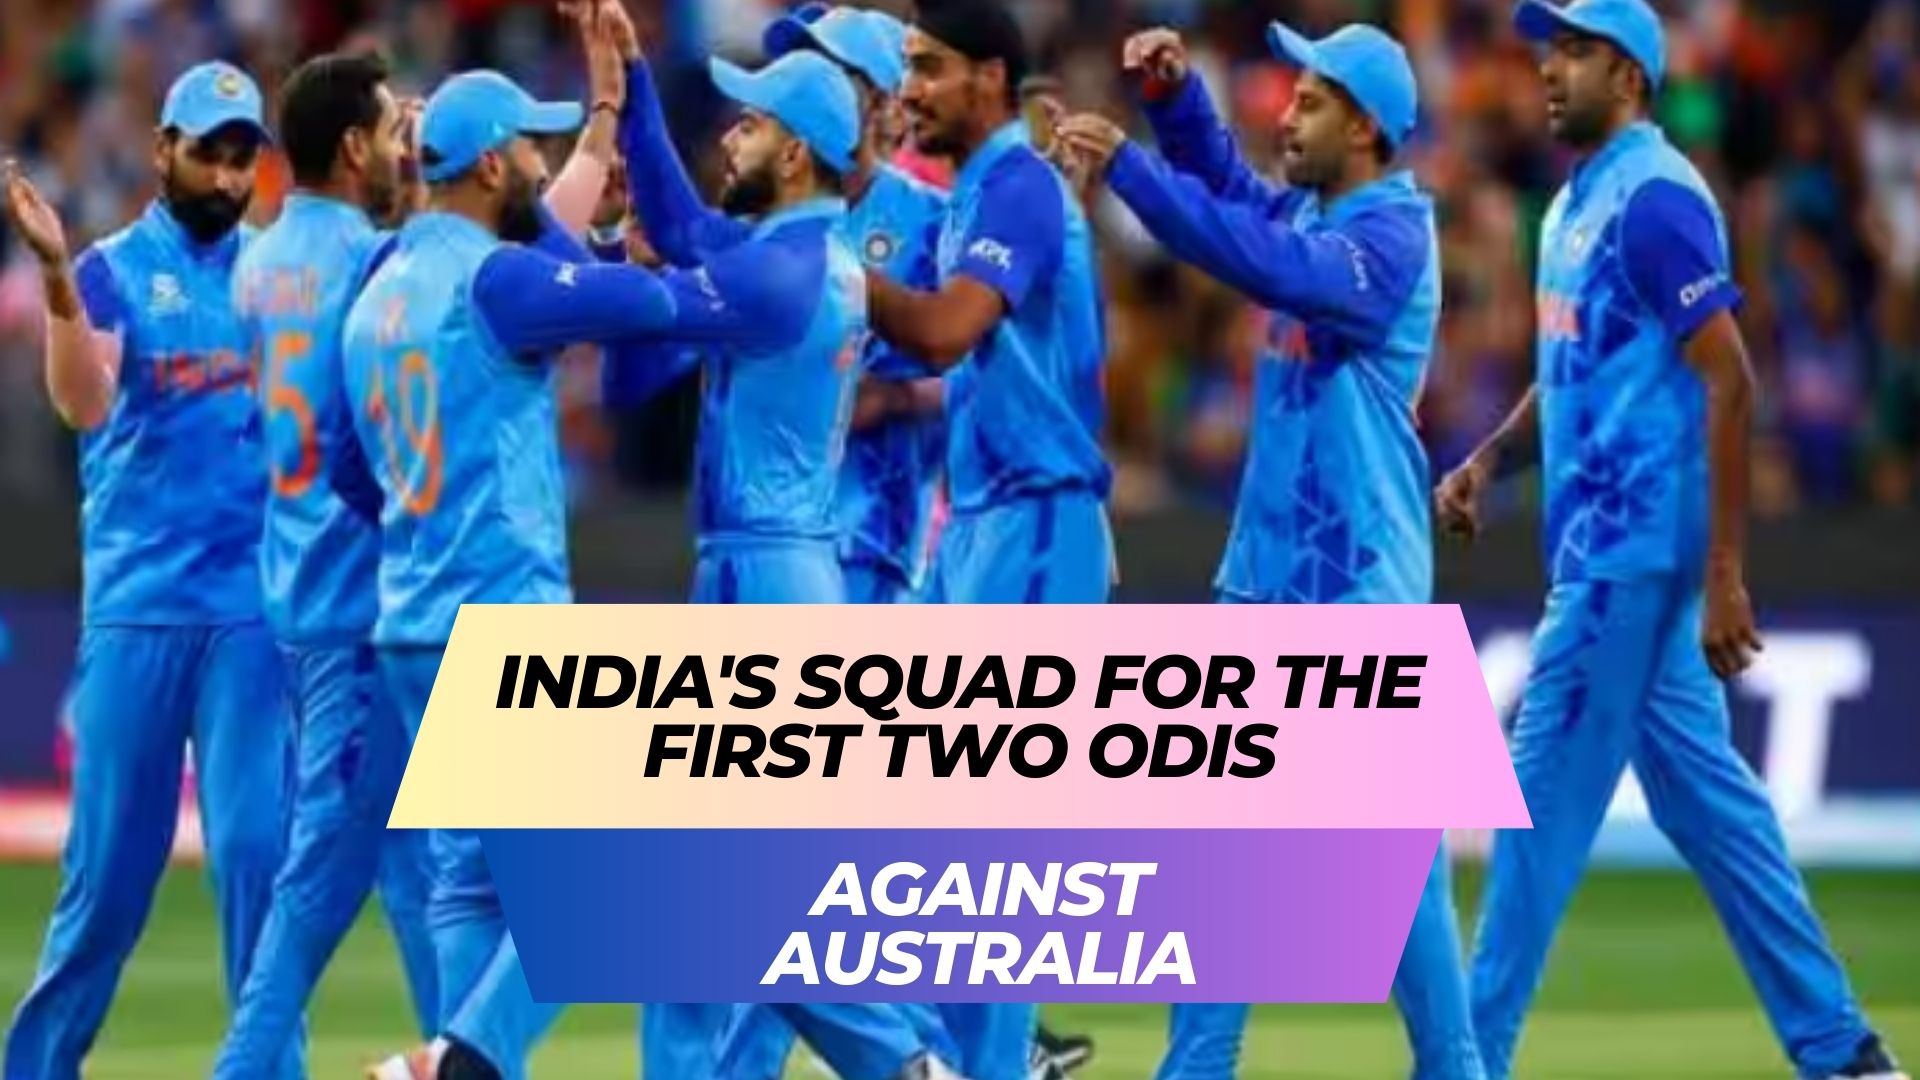 India's squad for the first two ODIs against Australia